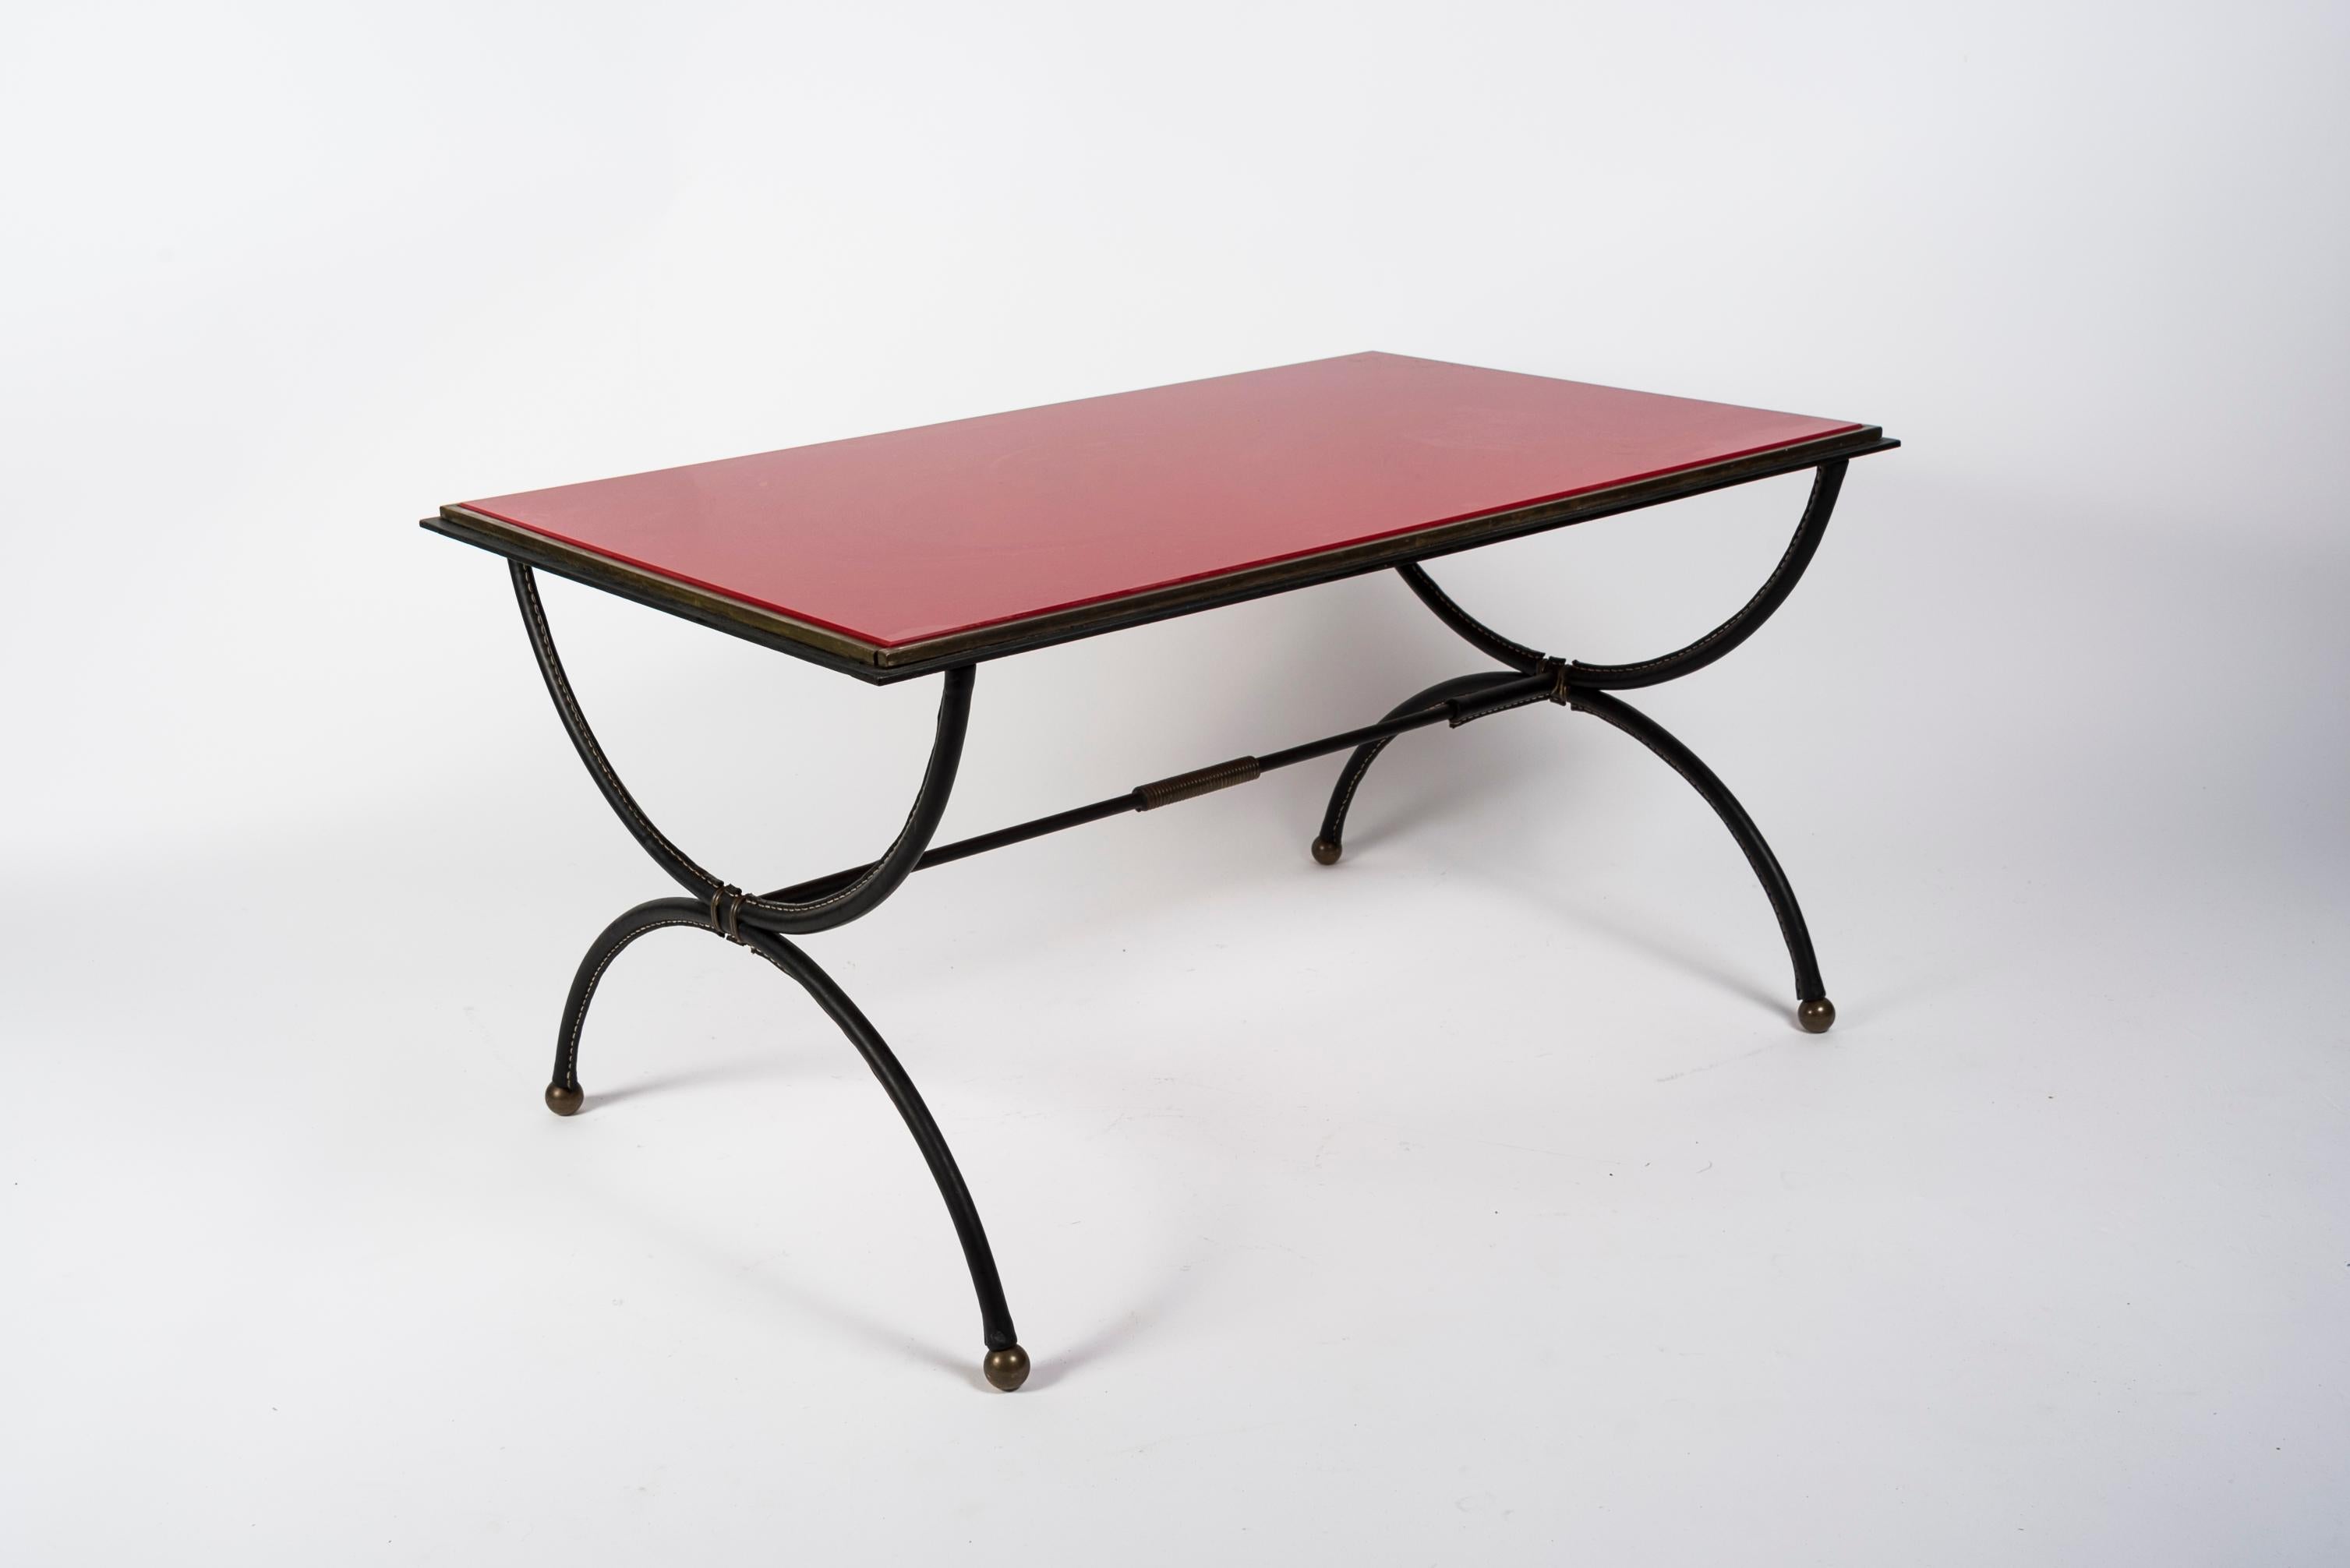 European 1950's Stitched Leather and Opaline Glass Cocktail Table by Jacques Adnet For Sale